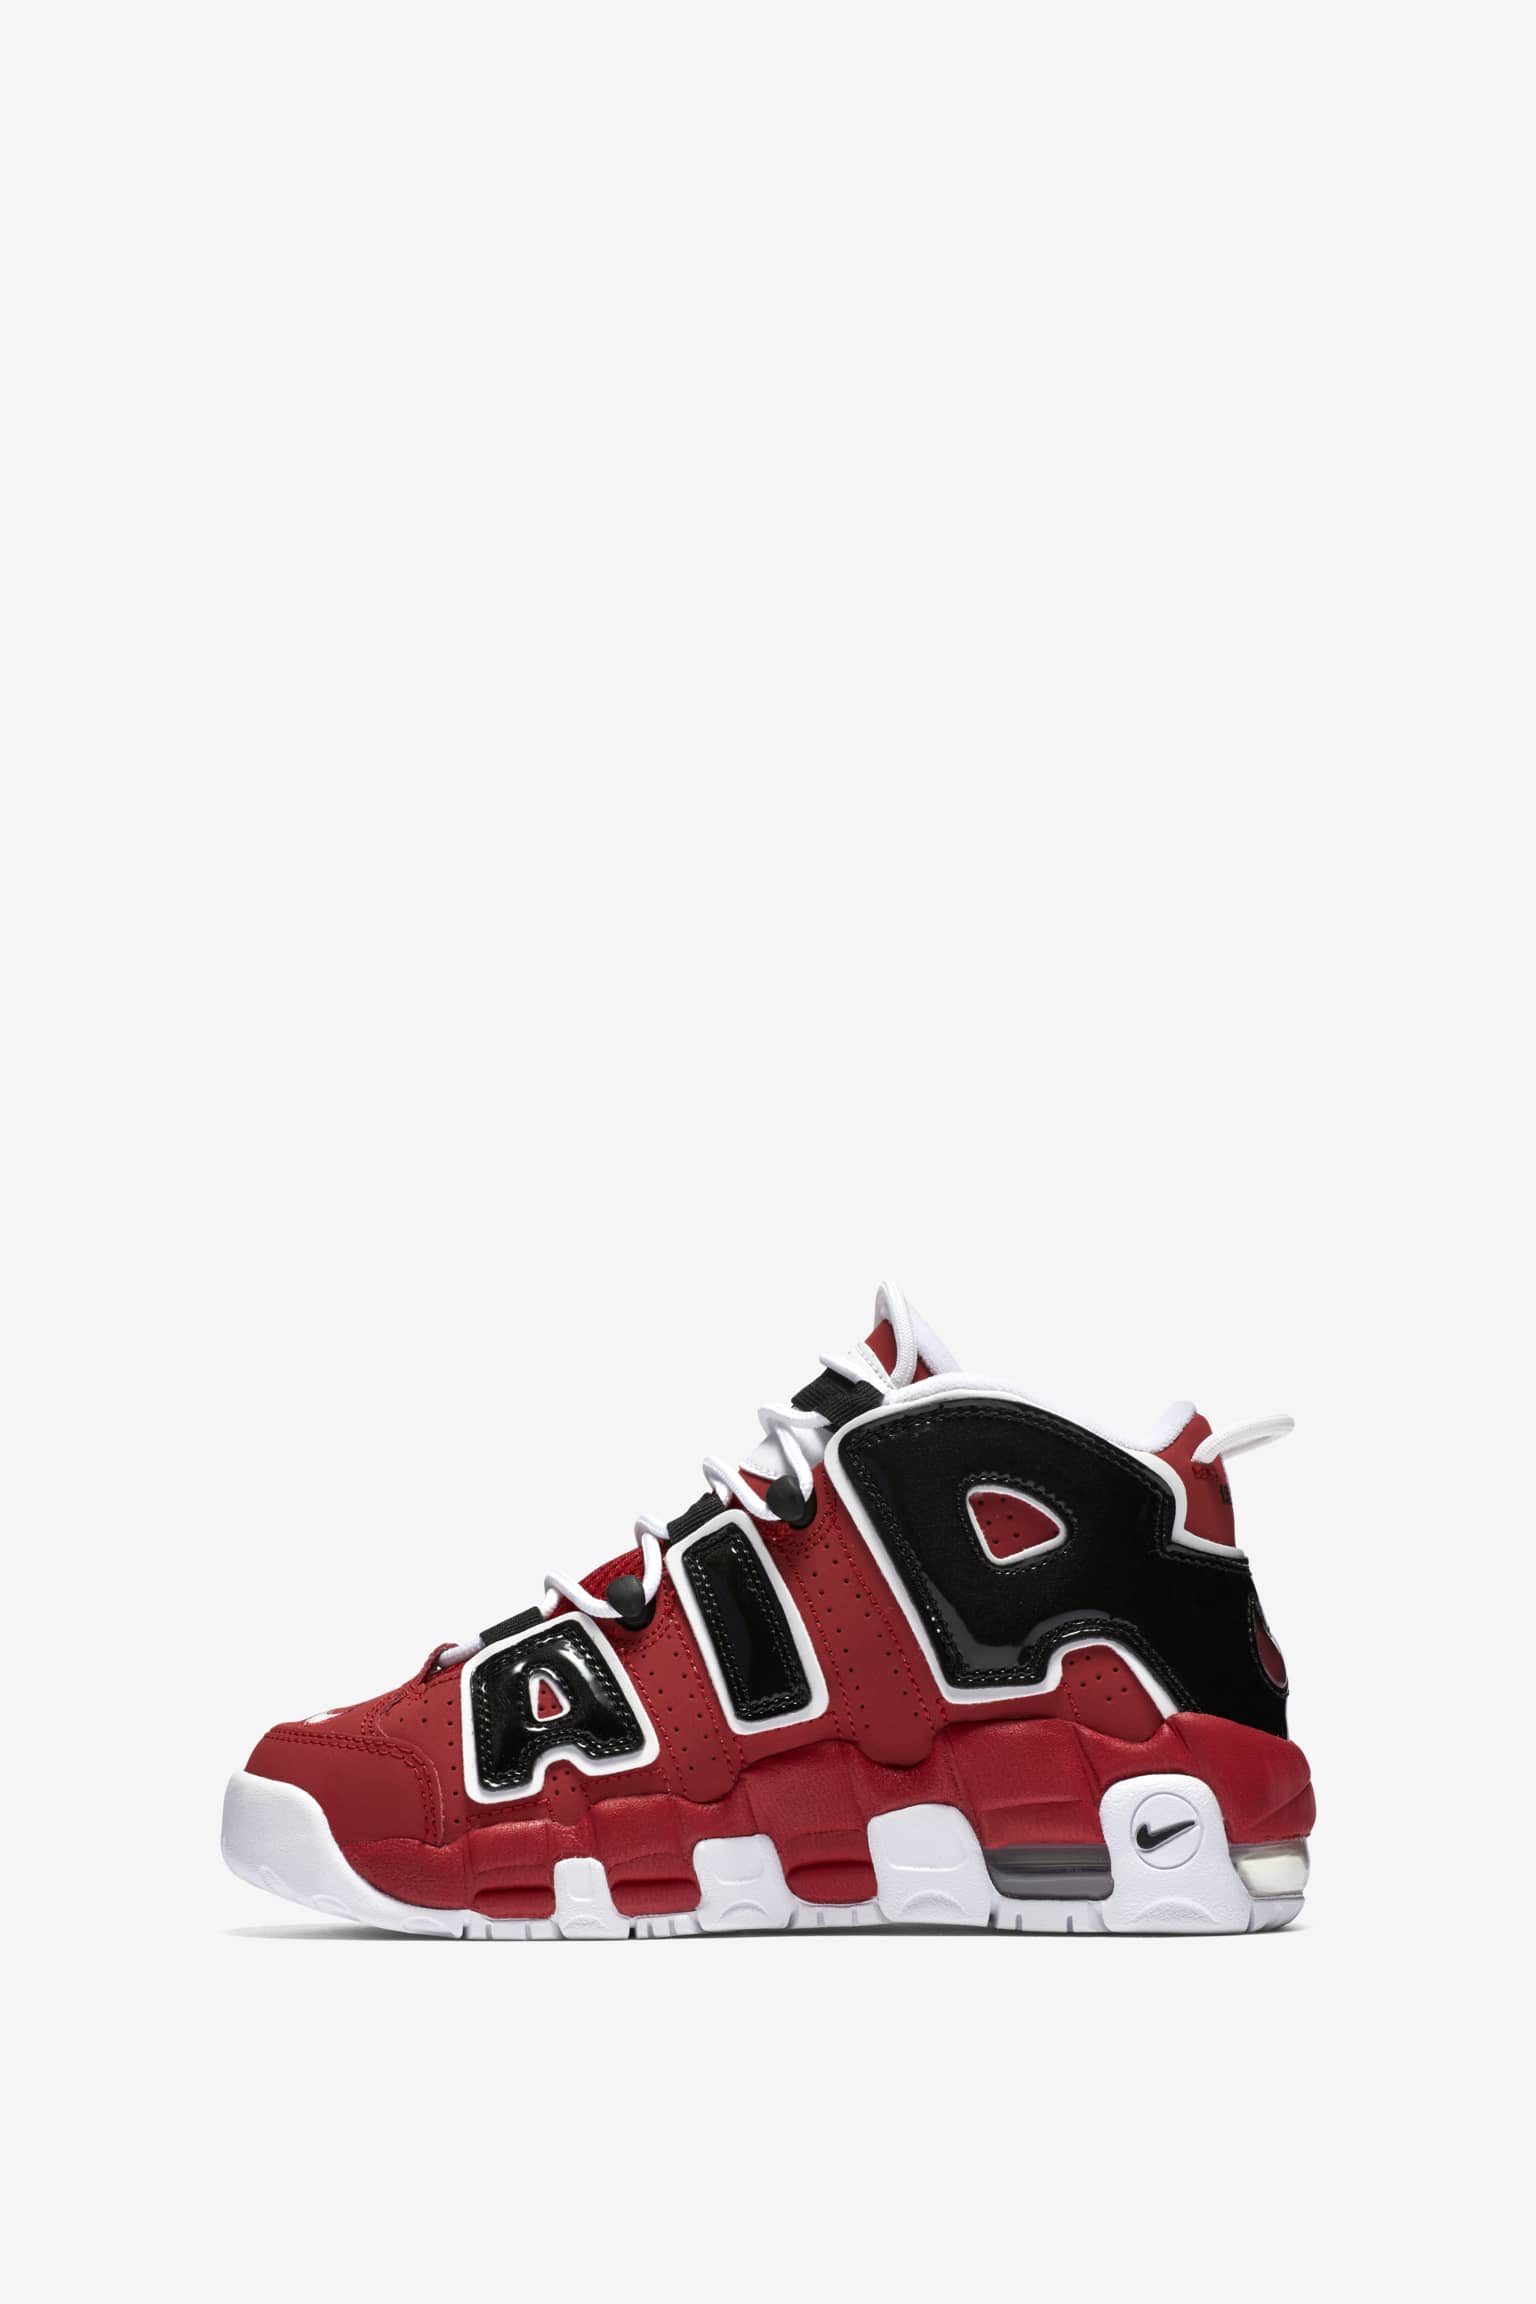 nike uptempo 96 red and black